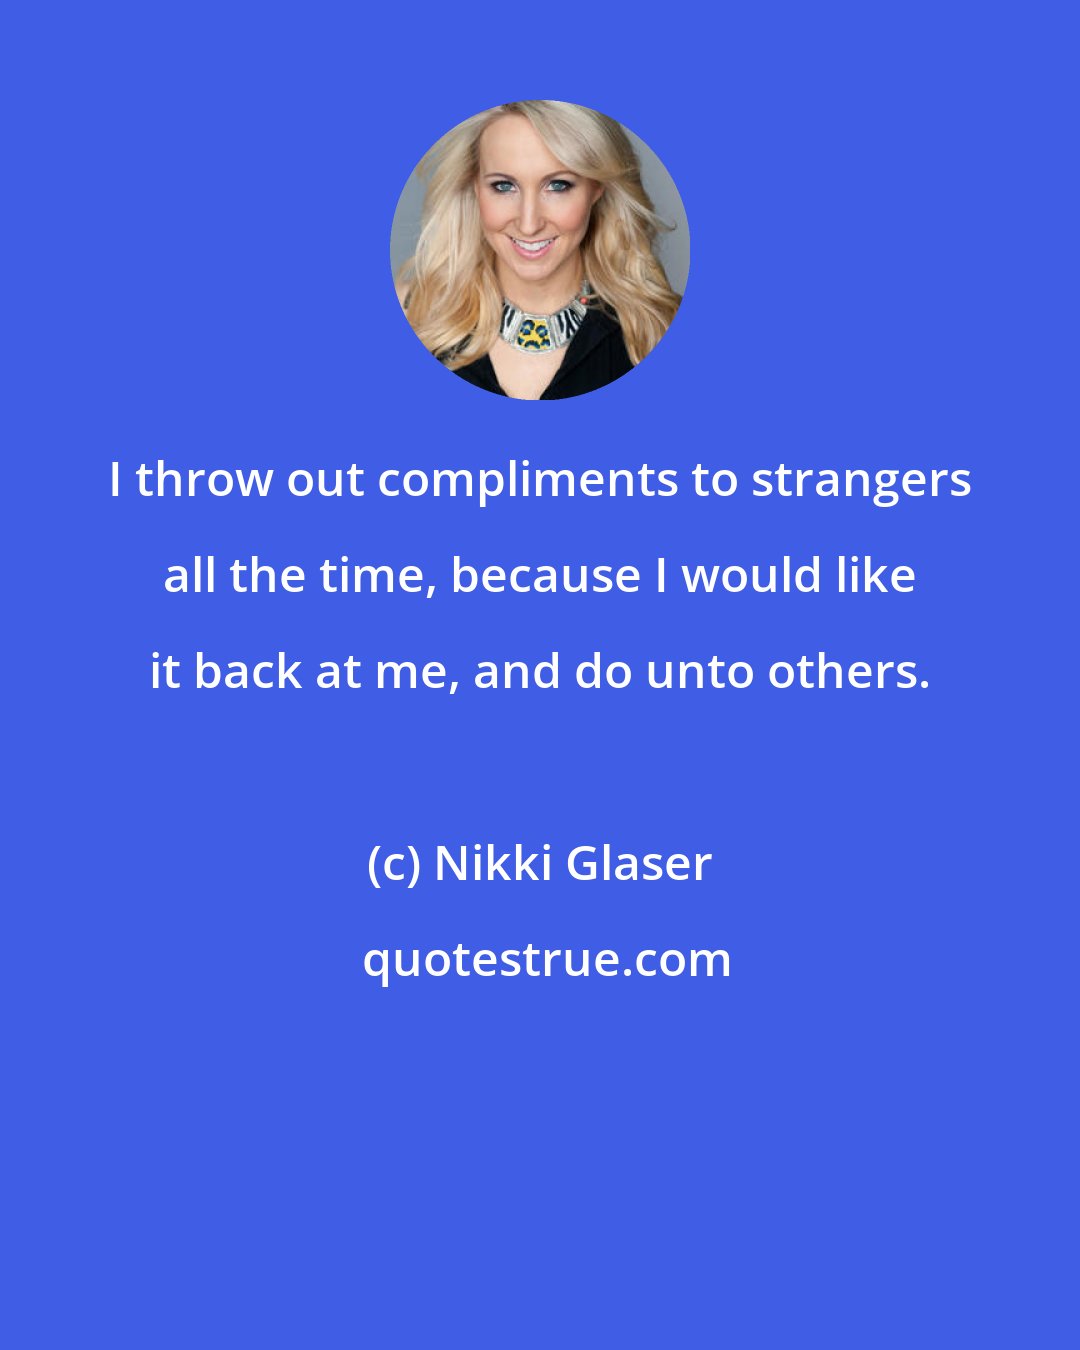 Nikki Glaser: I throw out compliments to strangers all the time, because I would like it back at me, and do unto others.